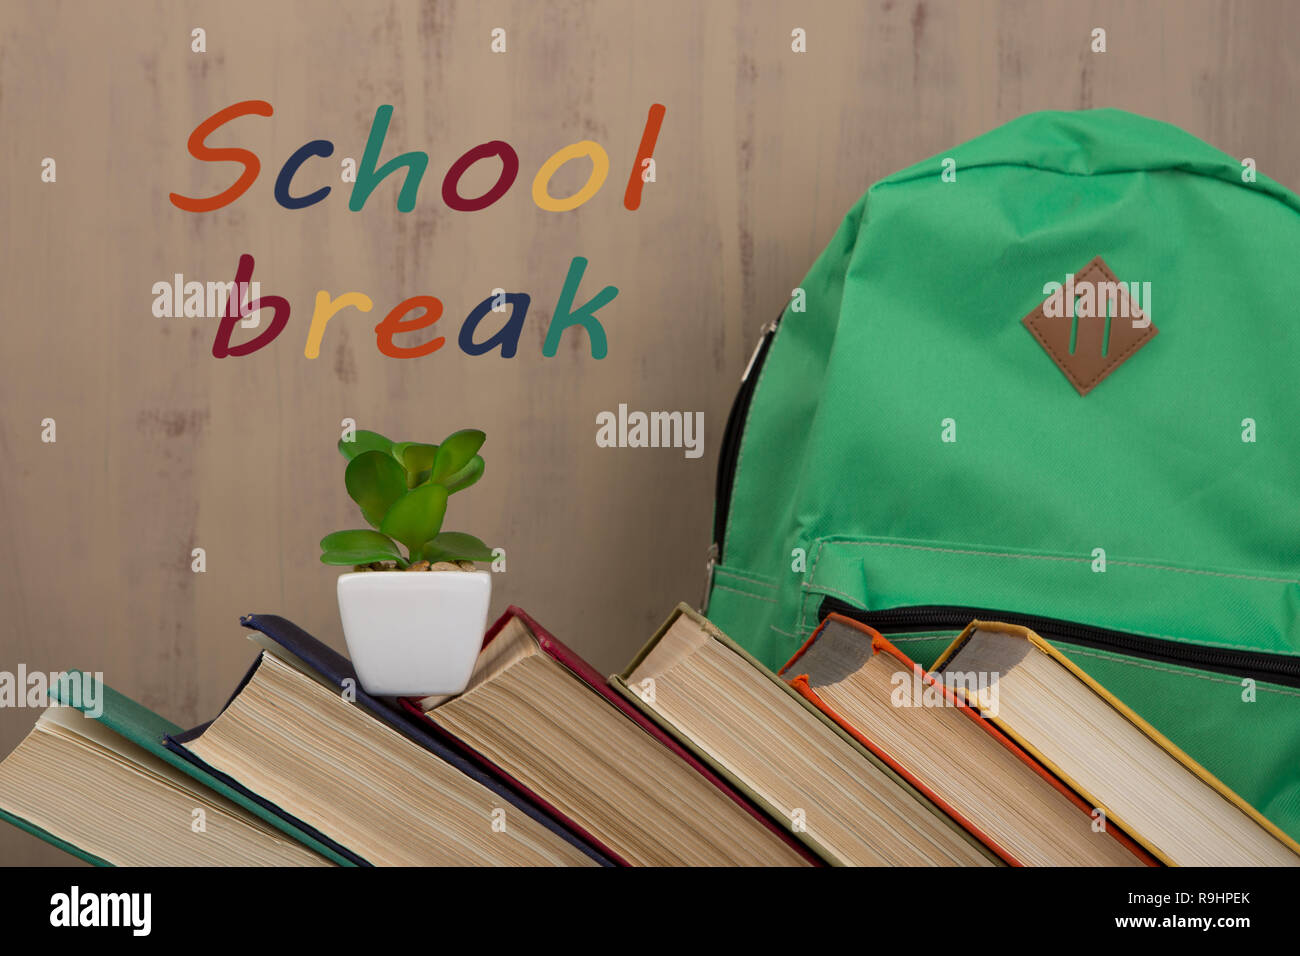 Back to school and education concept - colorful hardback books and green backpack on brown background with text 'School break' Stock Photo